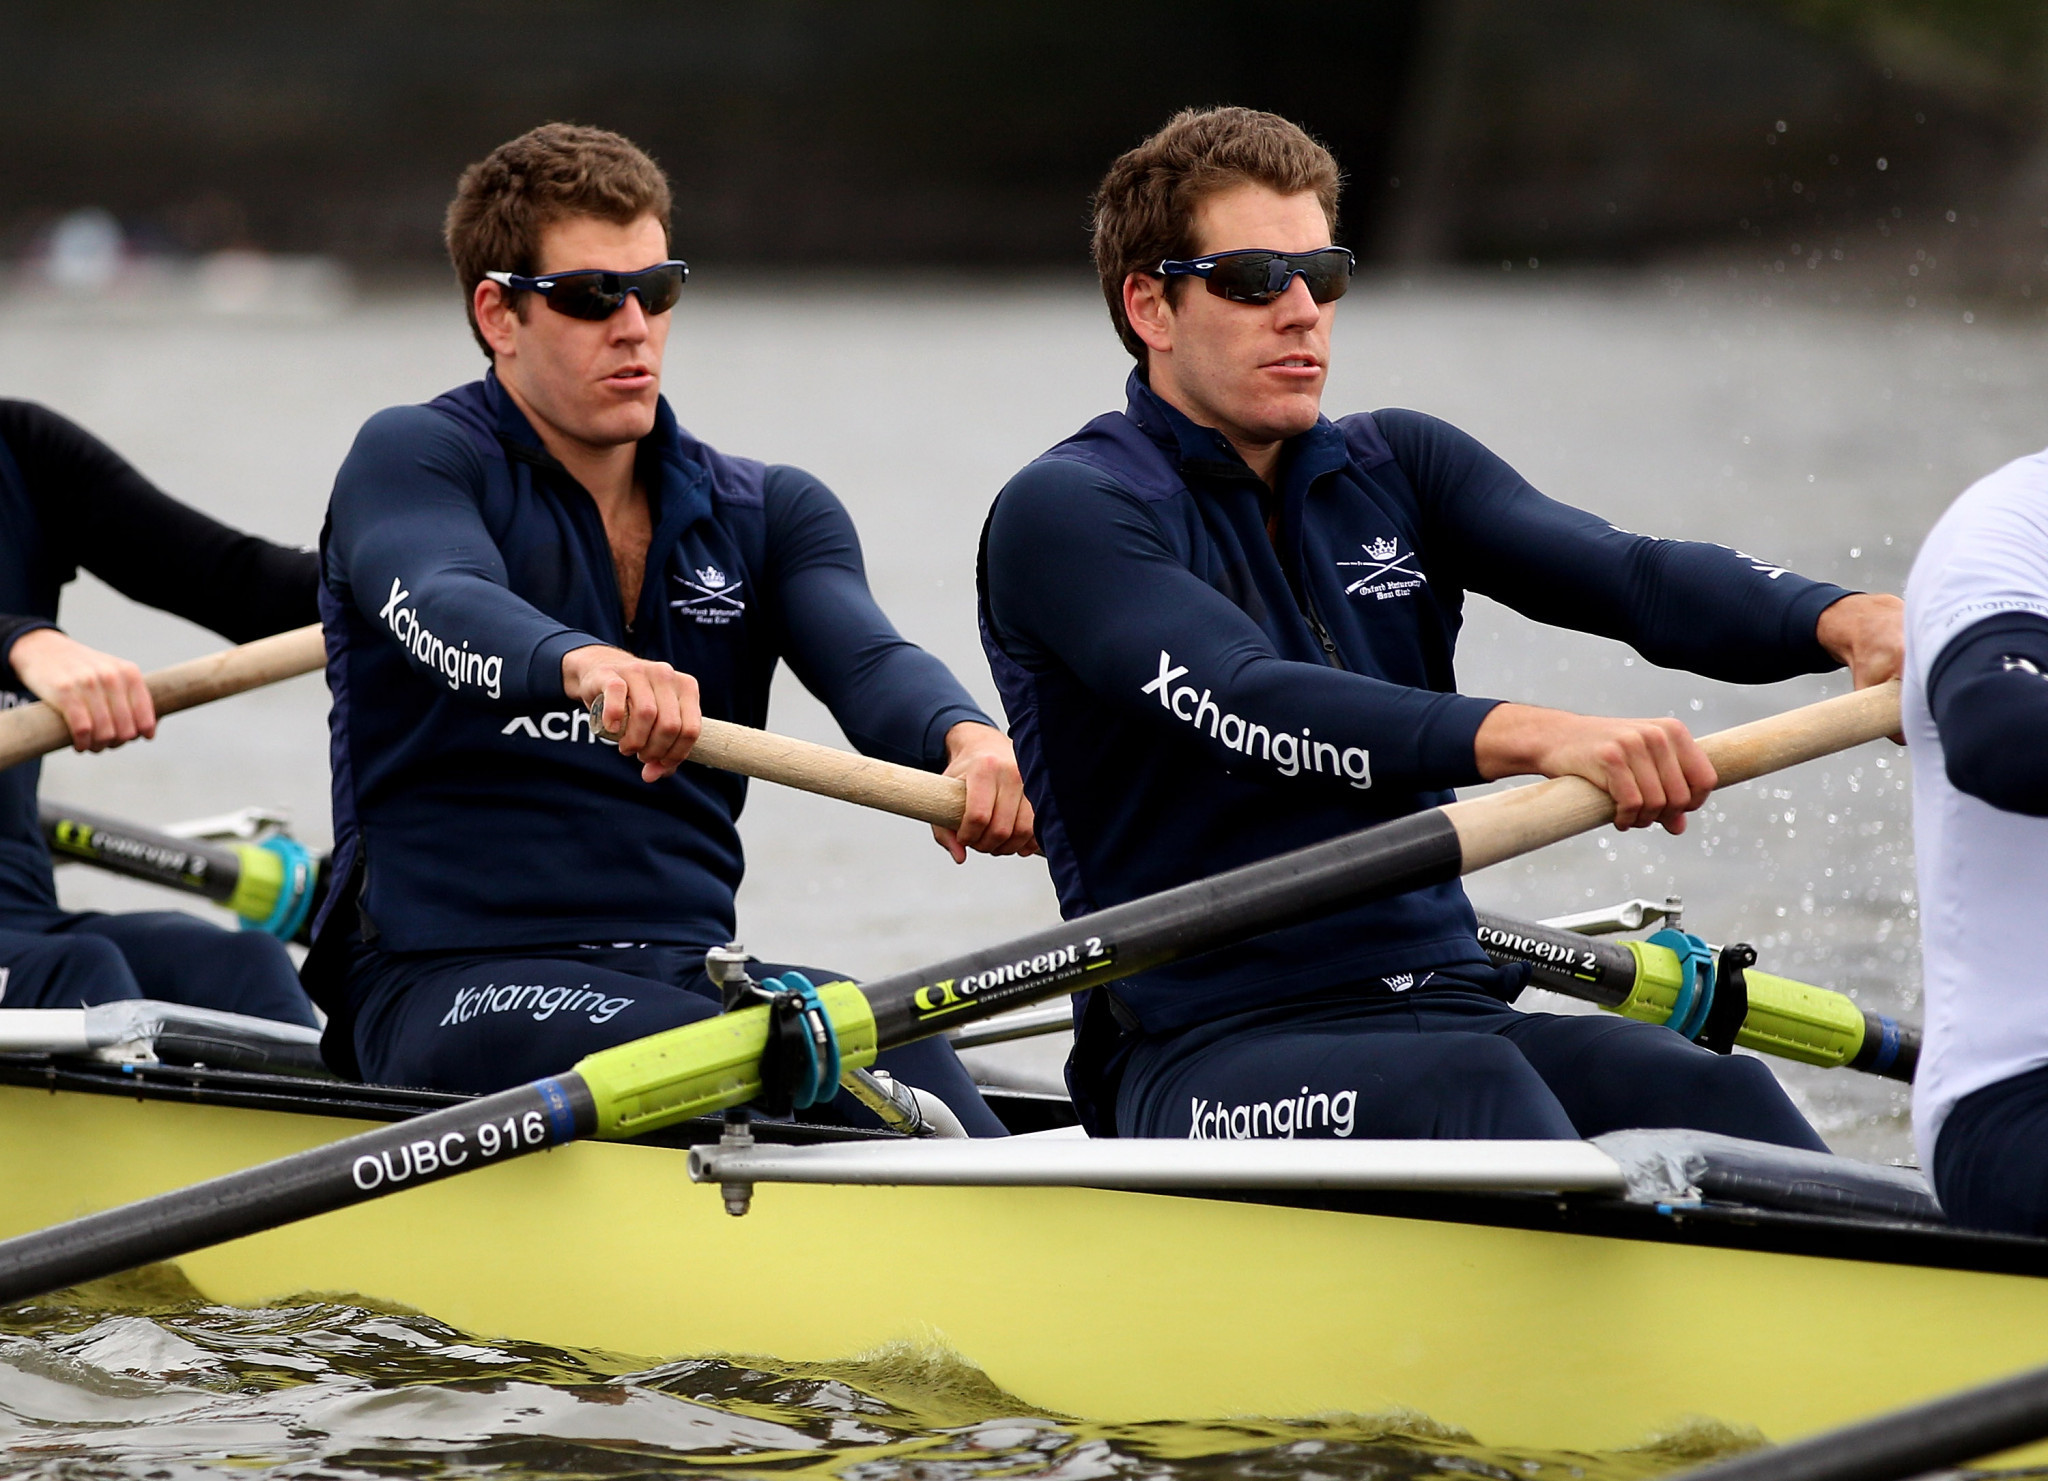 Company founded by twin Olympic oarsmen to sponsor 2021 University Boat Race